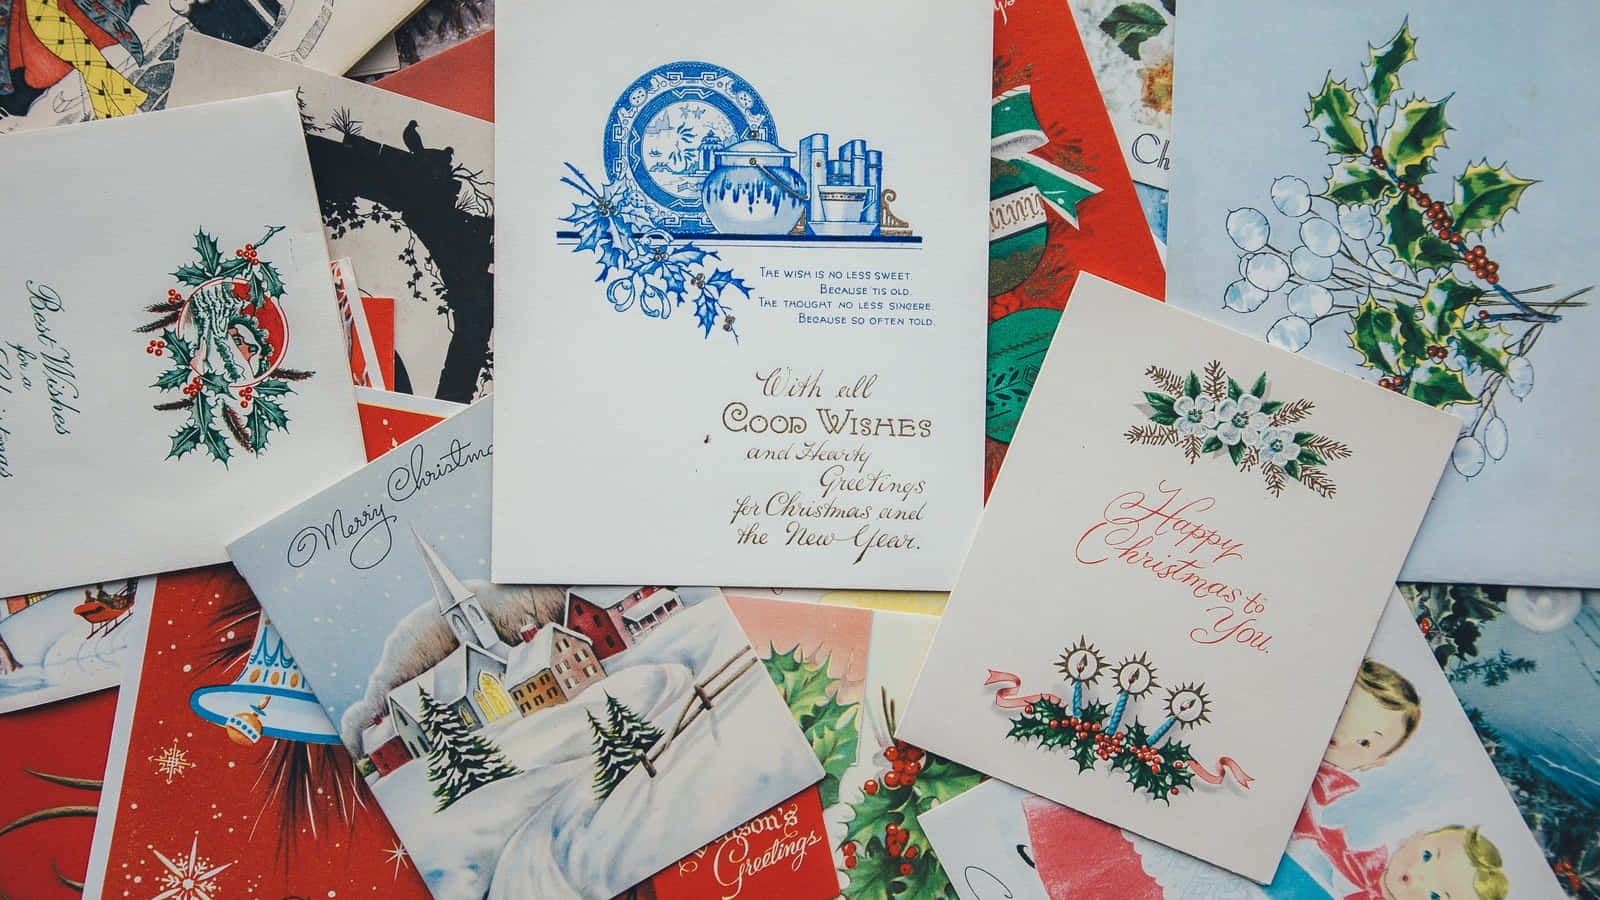 This year, show a bit of extra love to your friends and family with a personalized Christmas card.